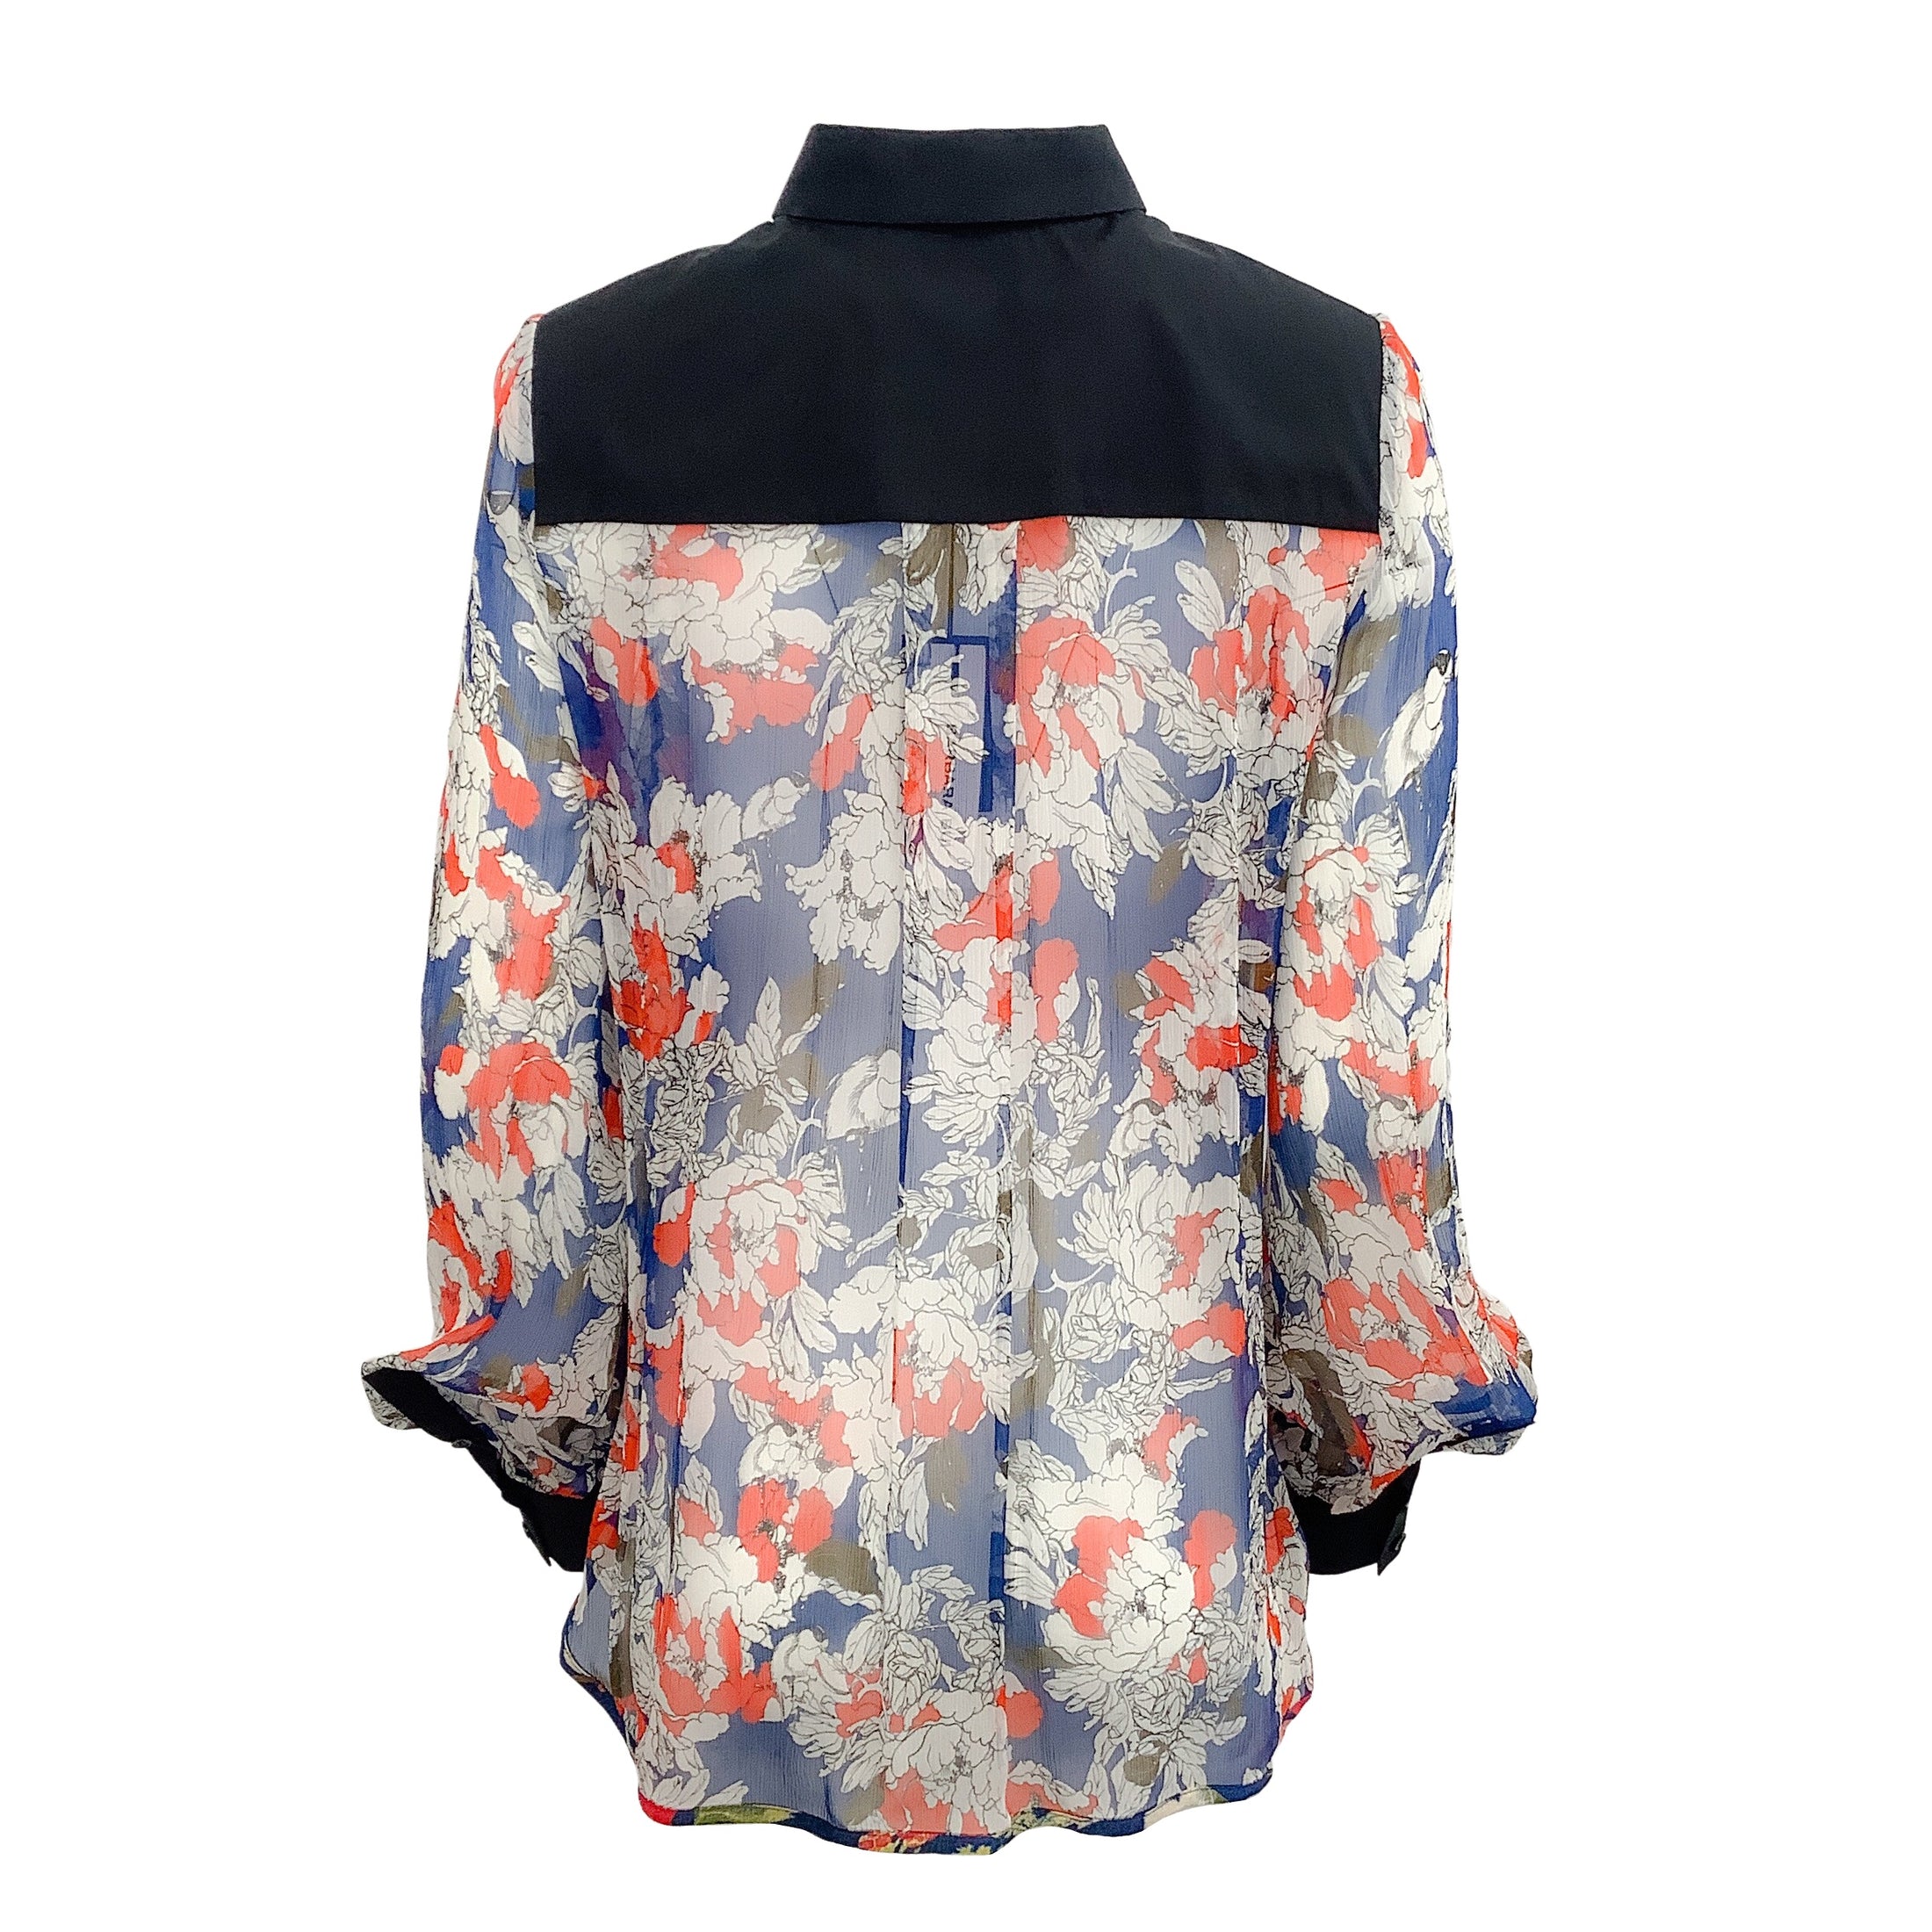 Barbara Bui Black Multi Floral Pleated Front Blouse